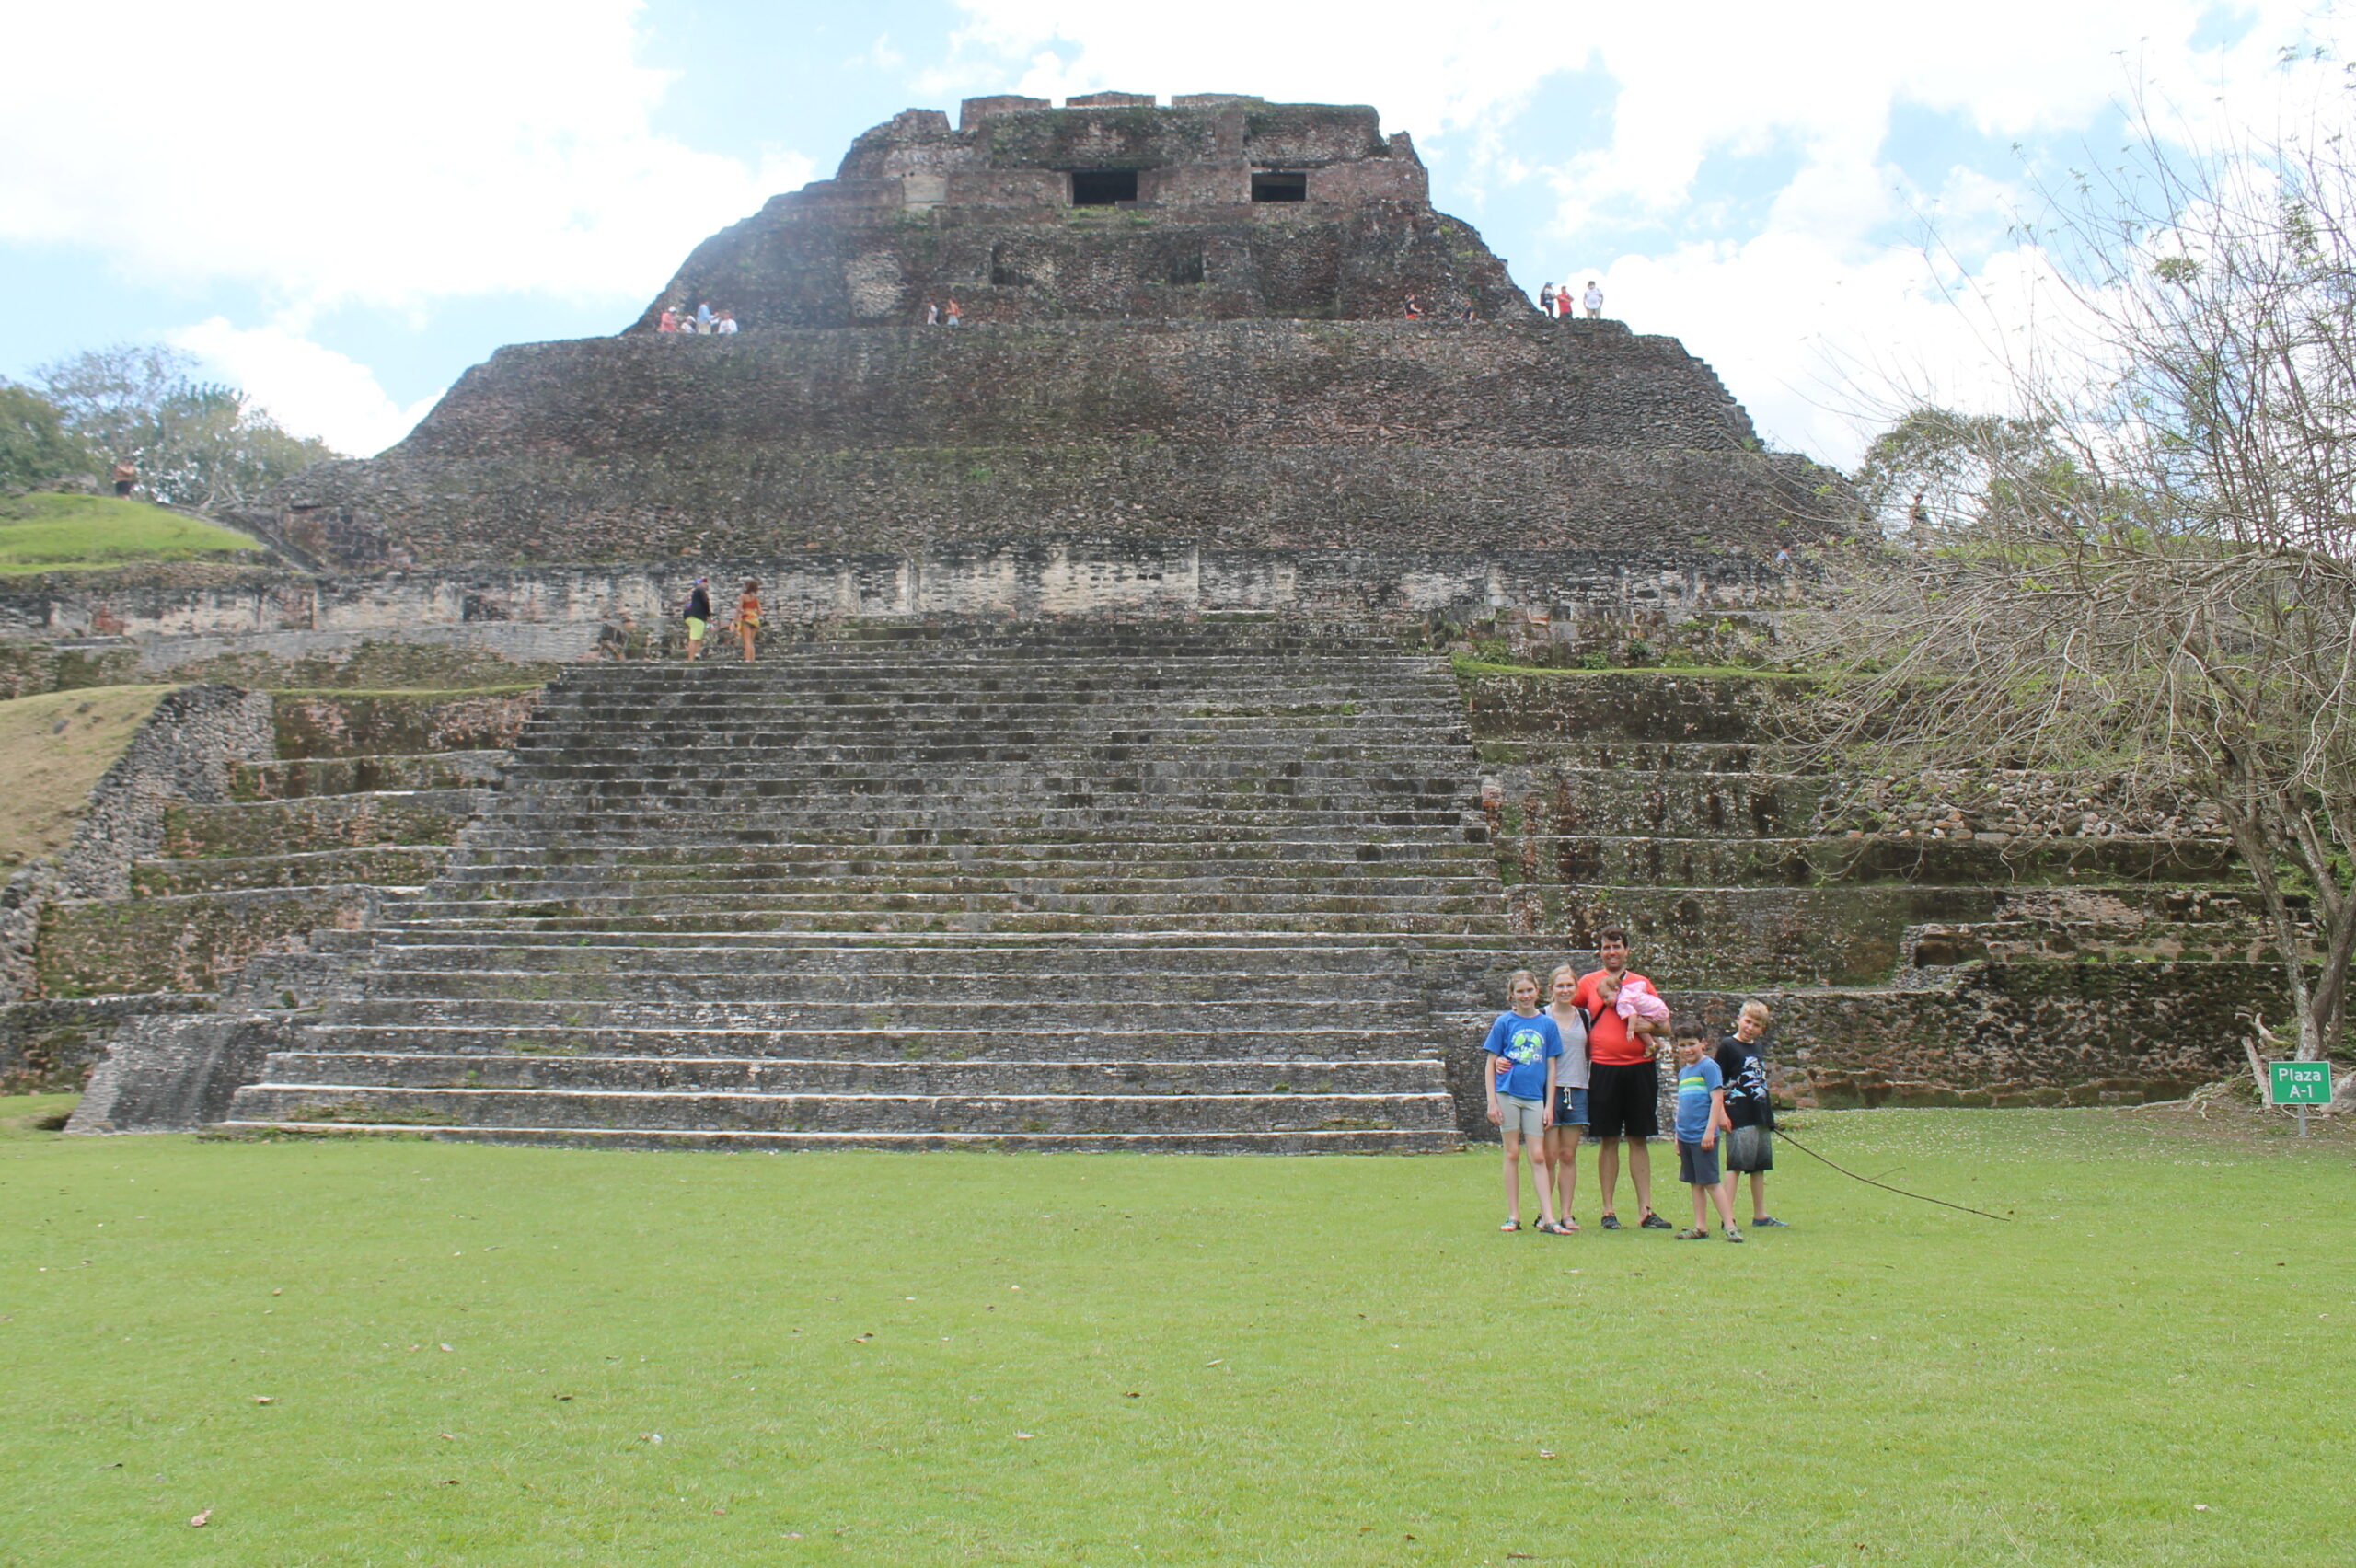 Family Travel Journal To Belize